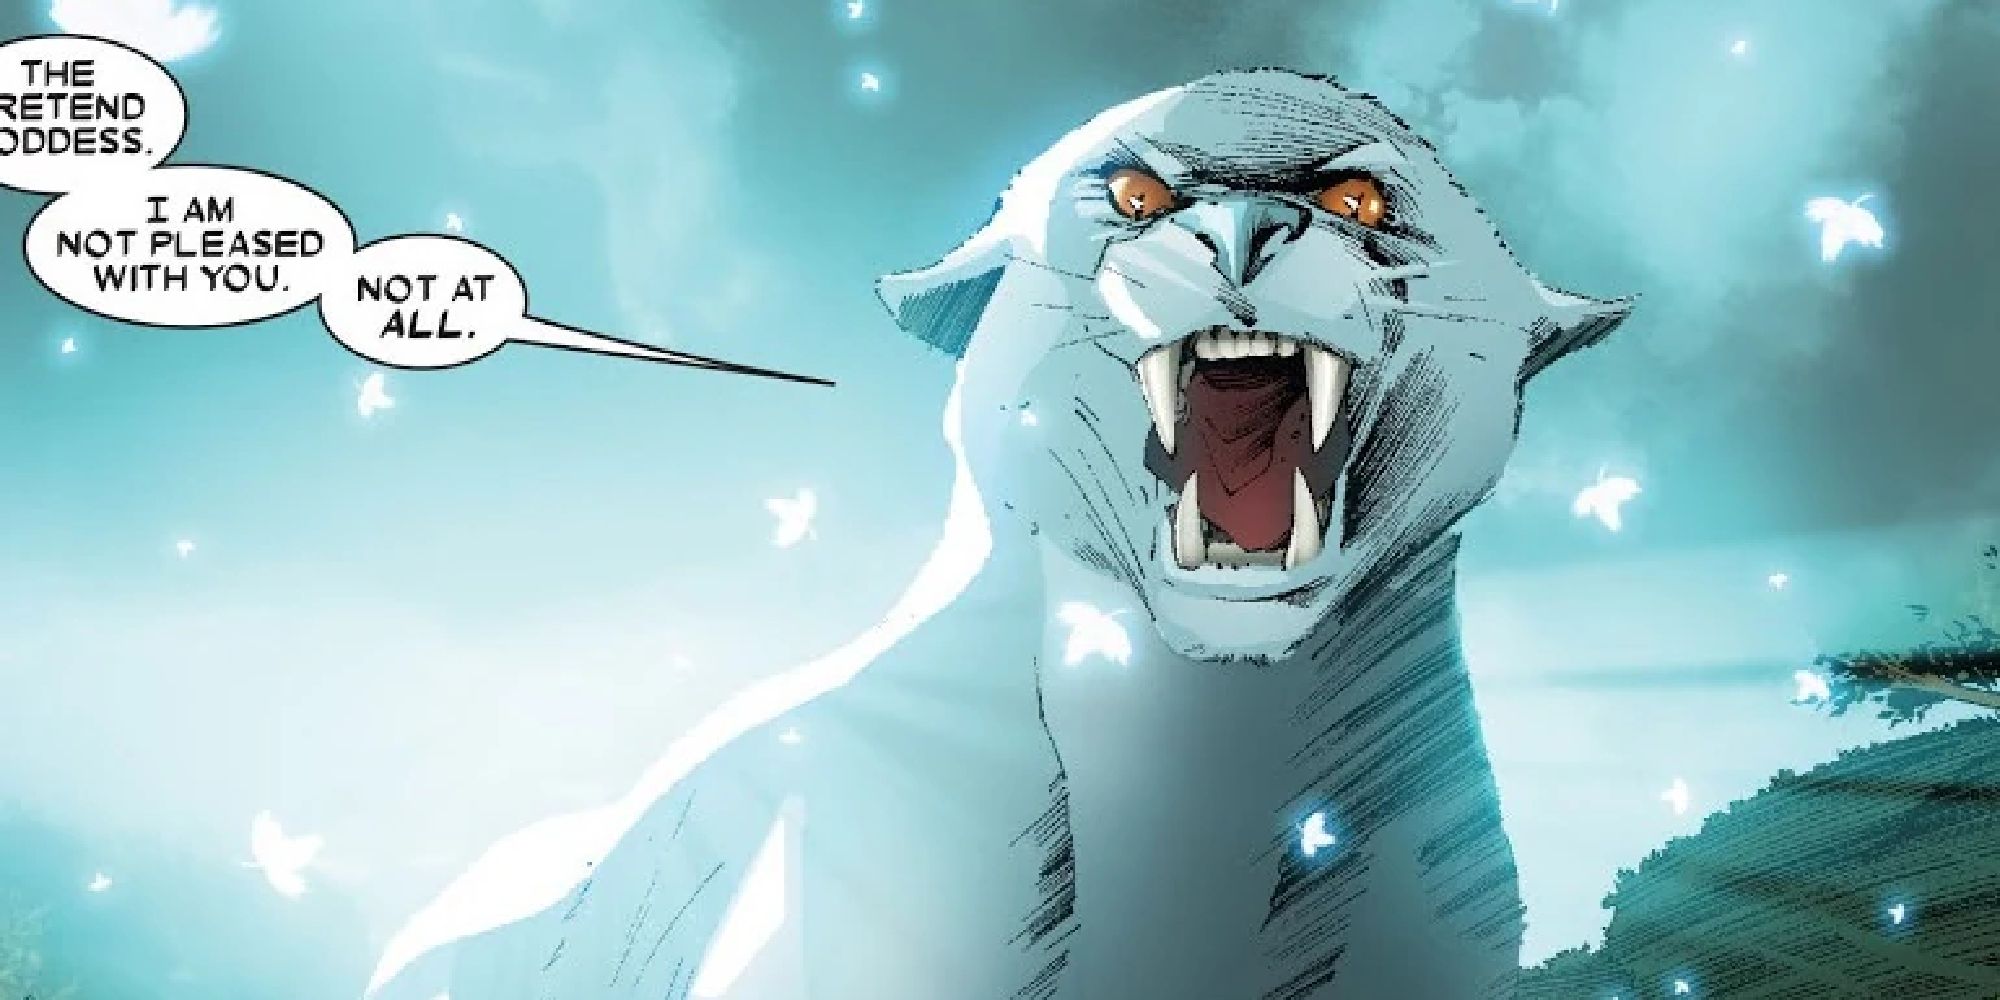 A vision of Bast as a white panther from Marvel Comics